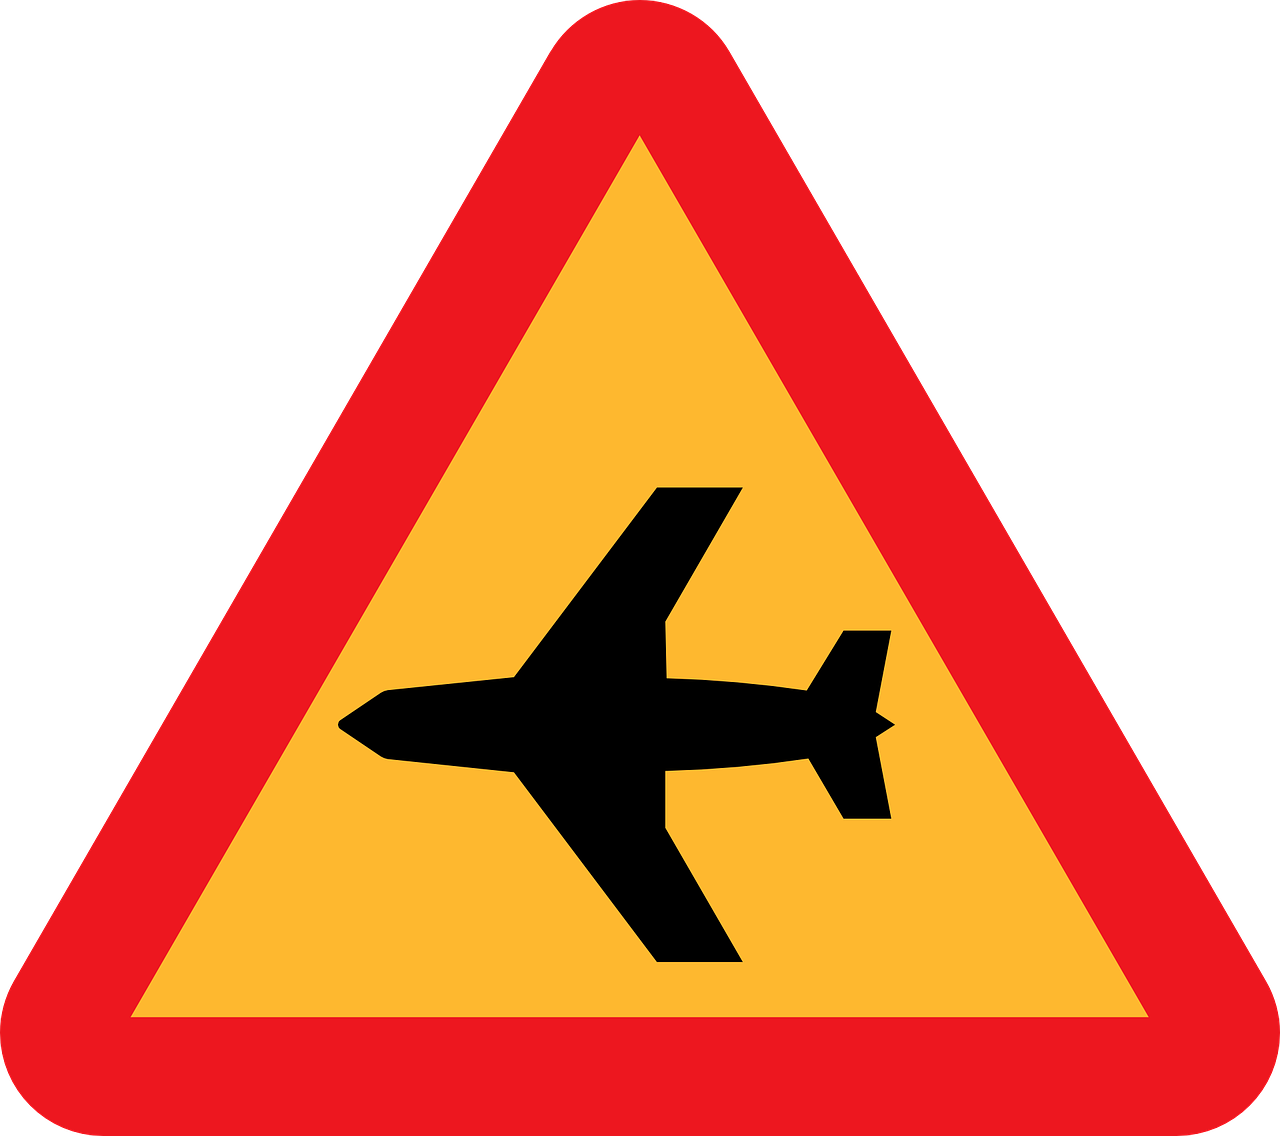 low flying aircraft sudden noise roadsign free photo